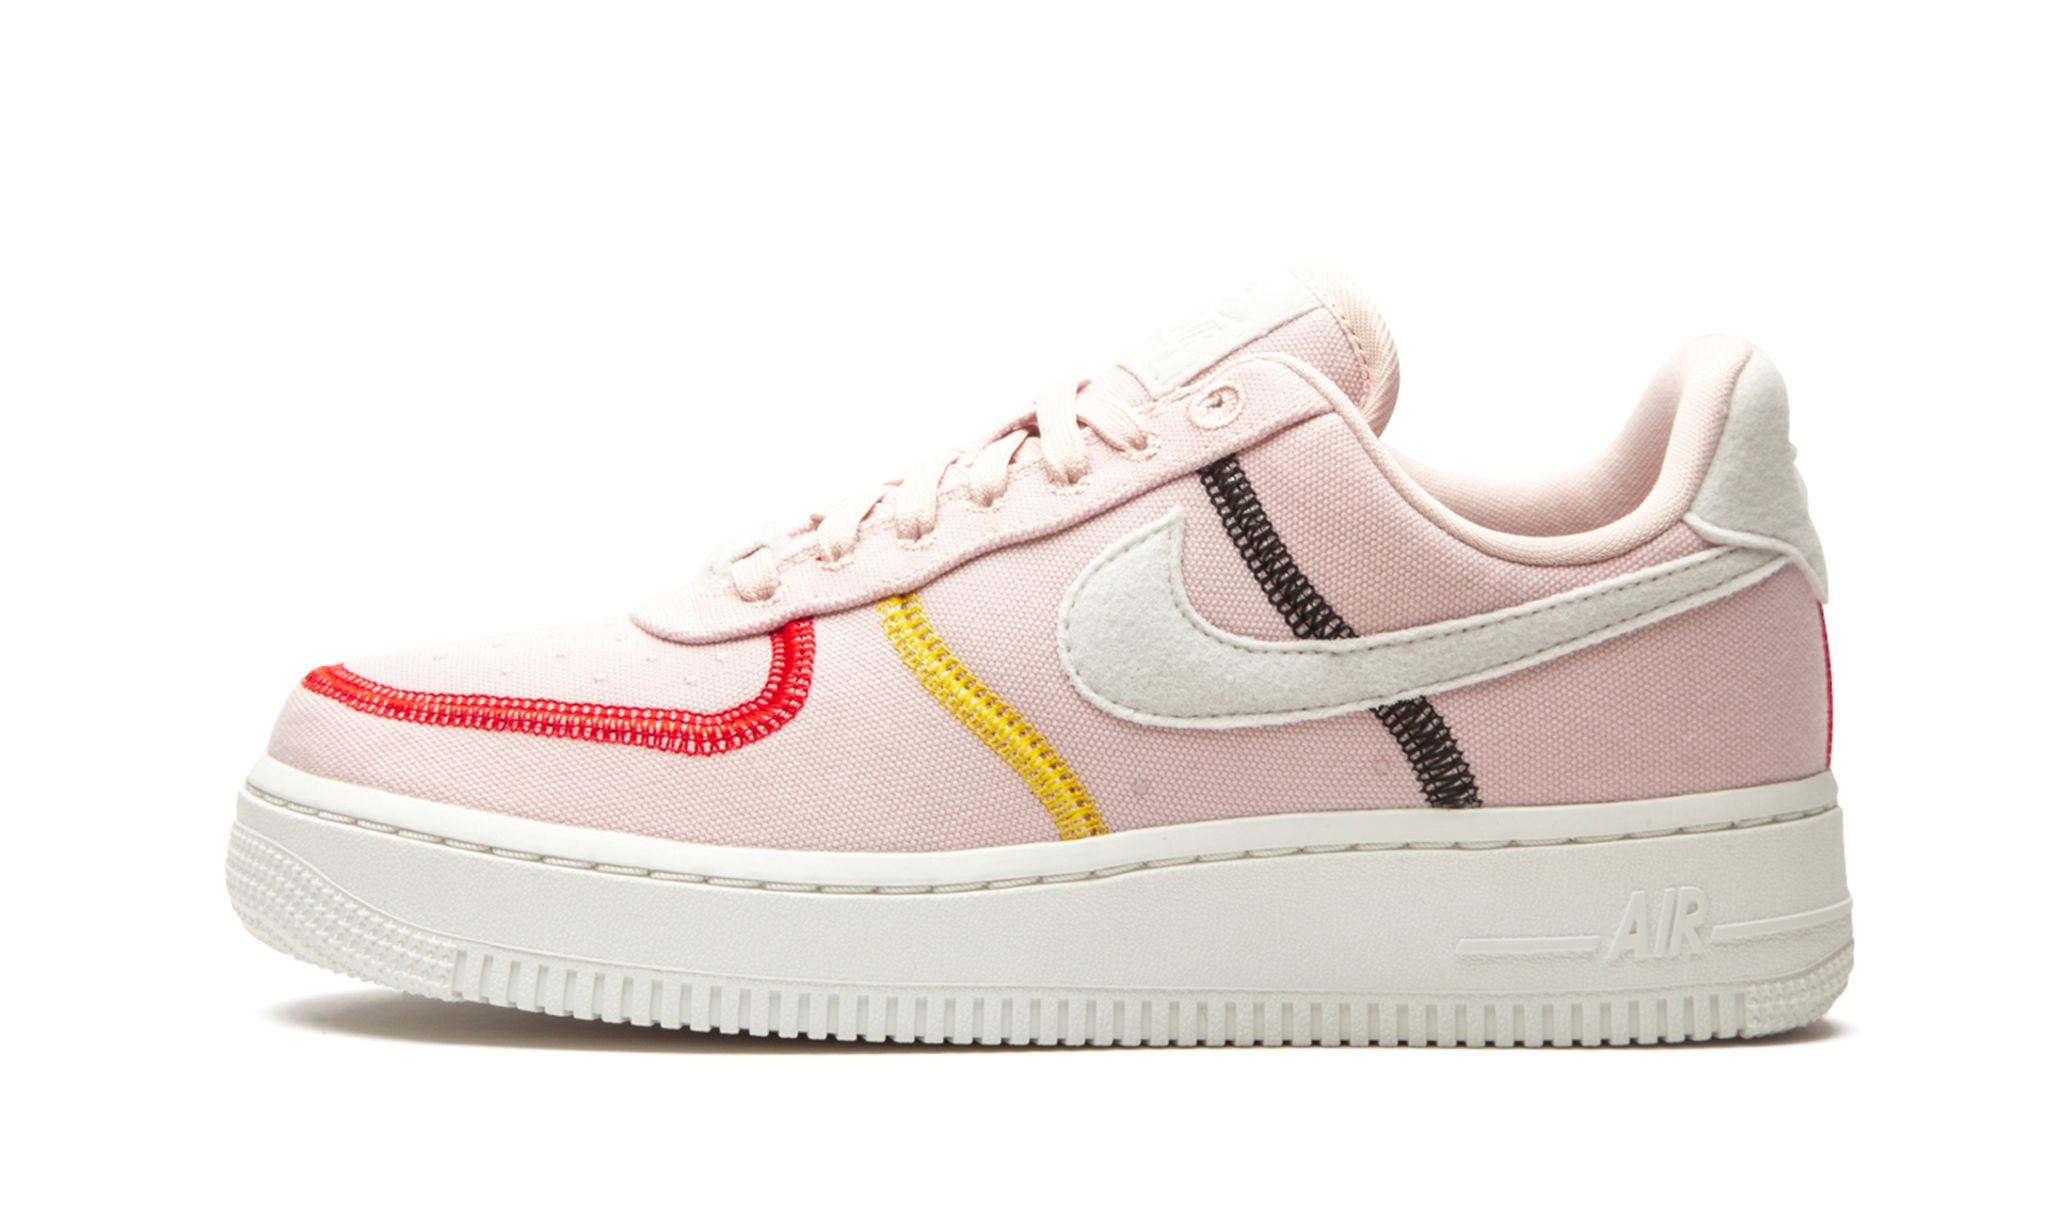 WMNS Air Force 1 "07 LX "Stitched Canvas - Silt Red" - 1